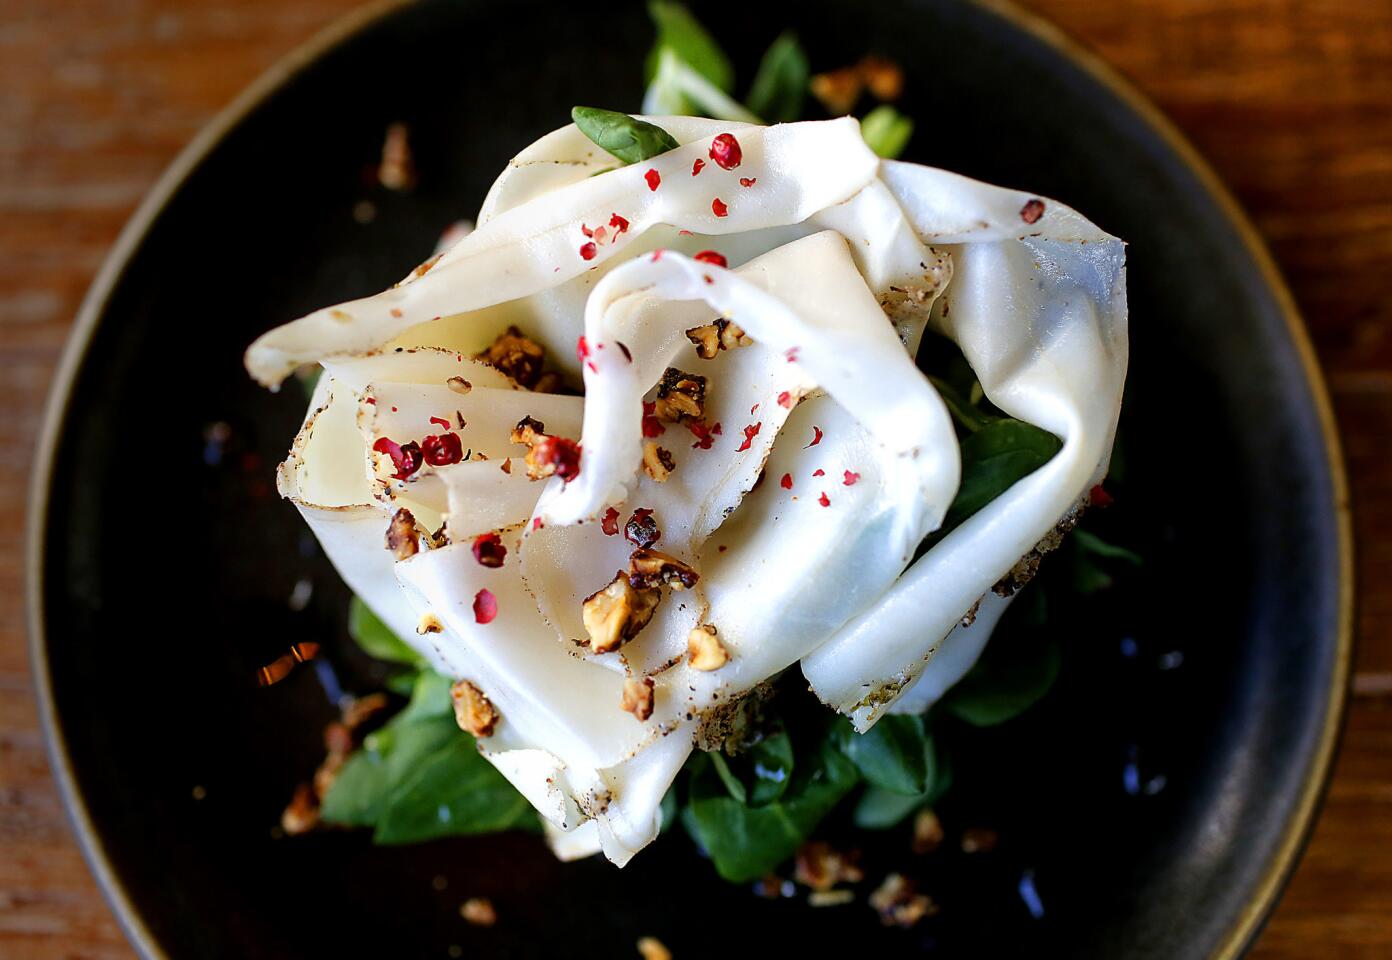 The lardo al pepe at Officine Brera is an artful composition of cured pork back fat atop arugula, dressed with honey, peppercorns and walnuts. The restaurant is a new endeavor from Matteo Ferdinandi and chef Angelo Auriana.